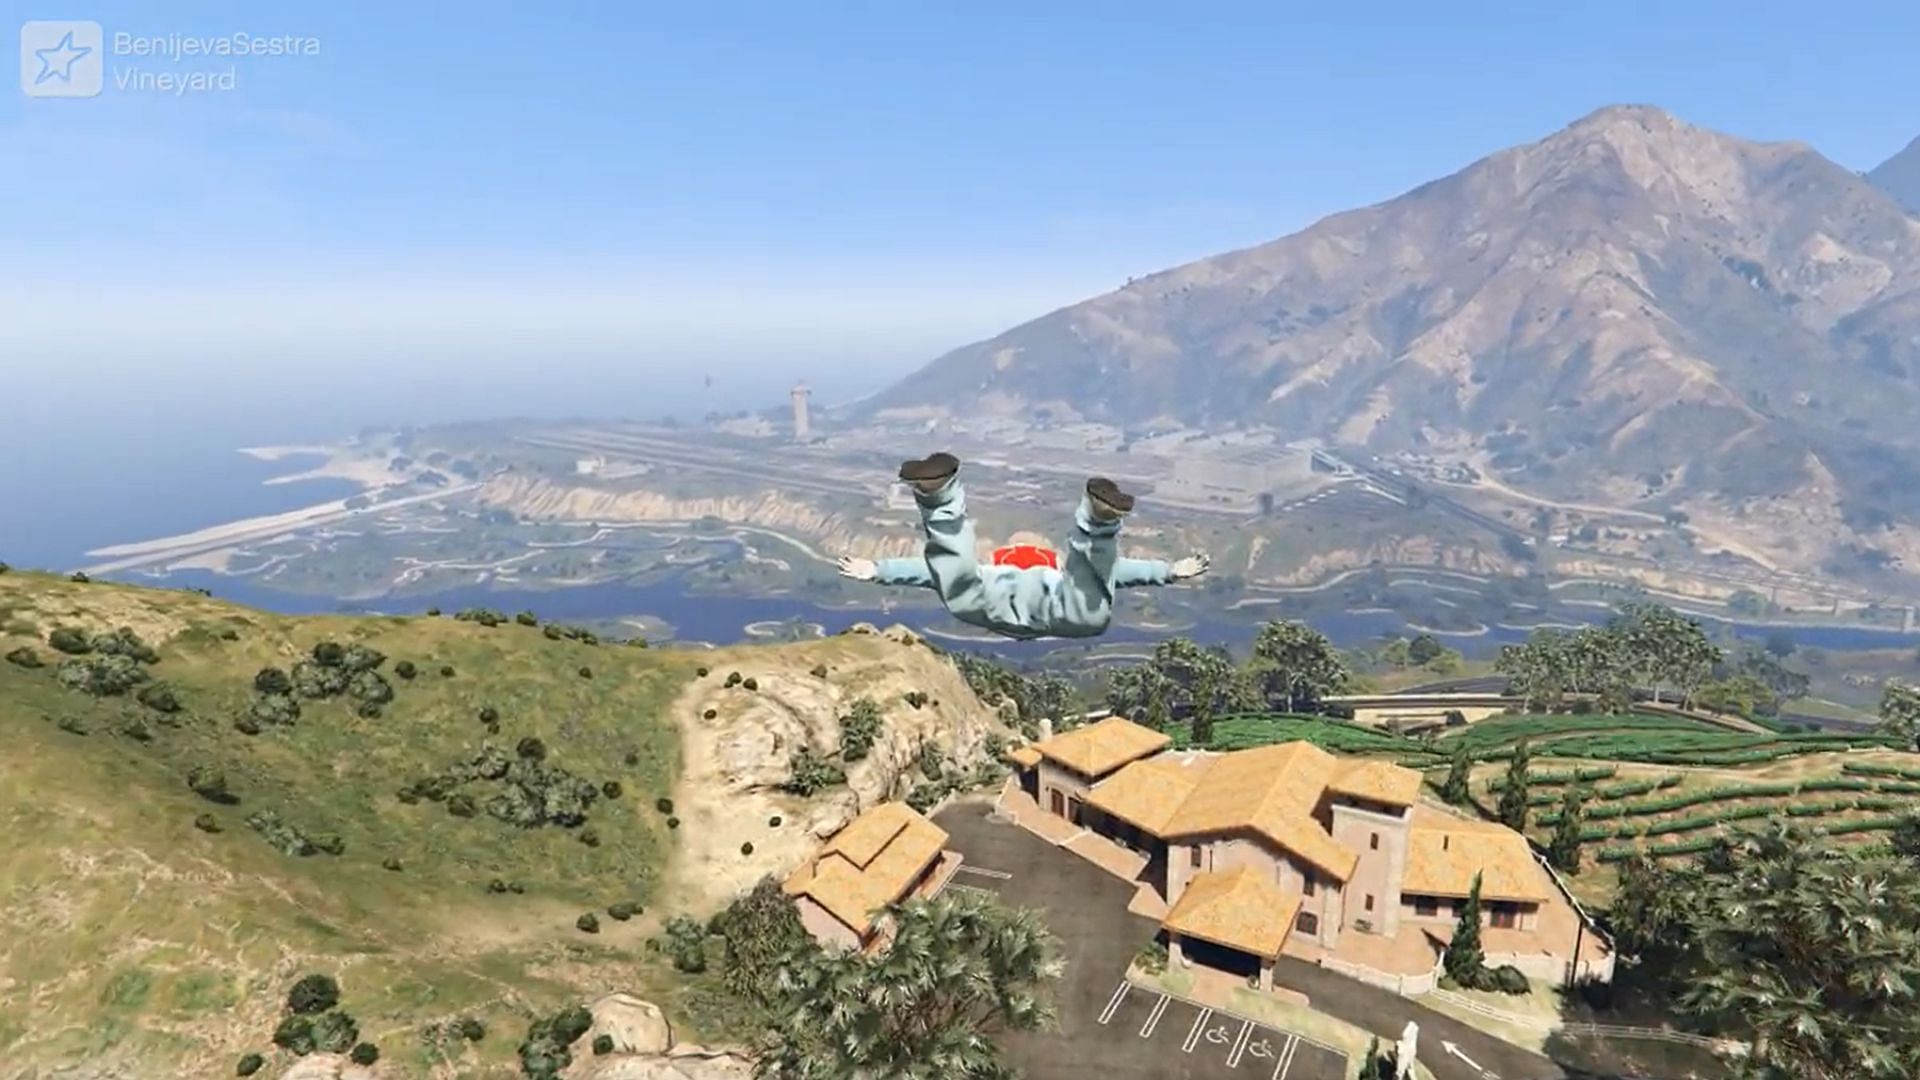 A player performed an outrageous skydiving stunt with parachute in GTA Online (Image via civoksark on Reddit)